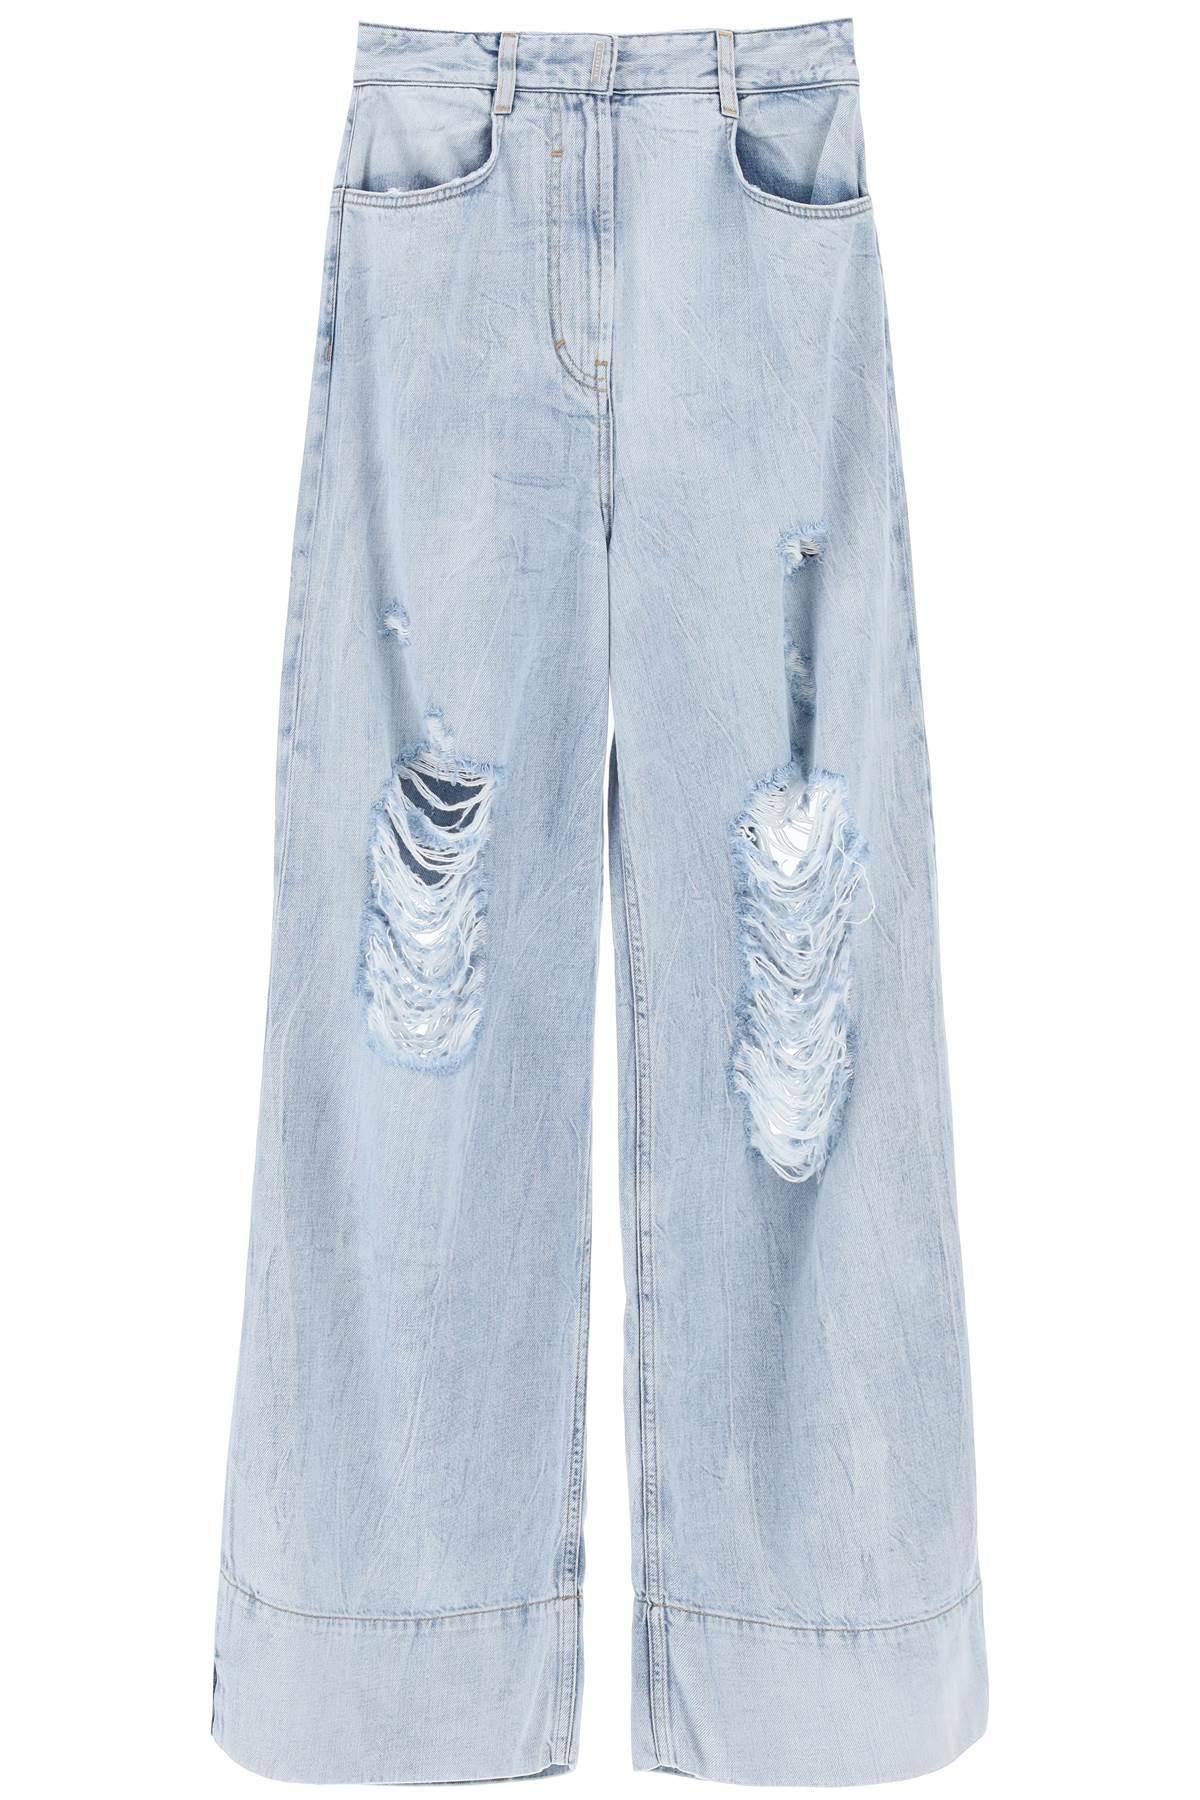 Givenchy Destroyed Denim Oversized Jeans in Blue | Lyst